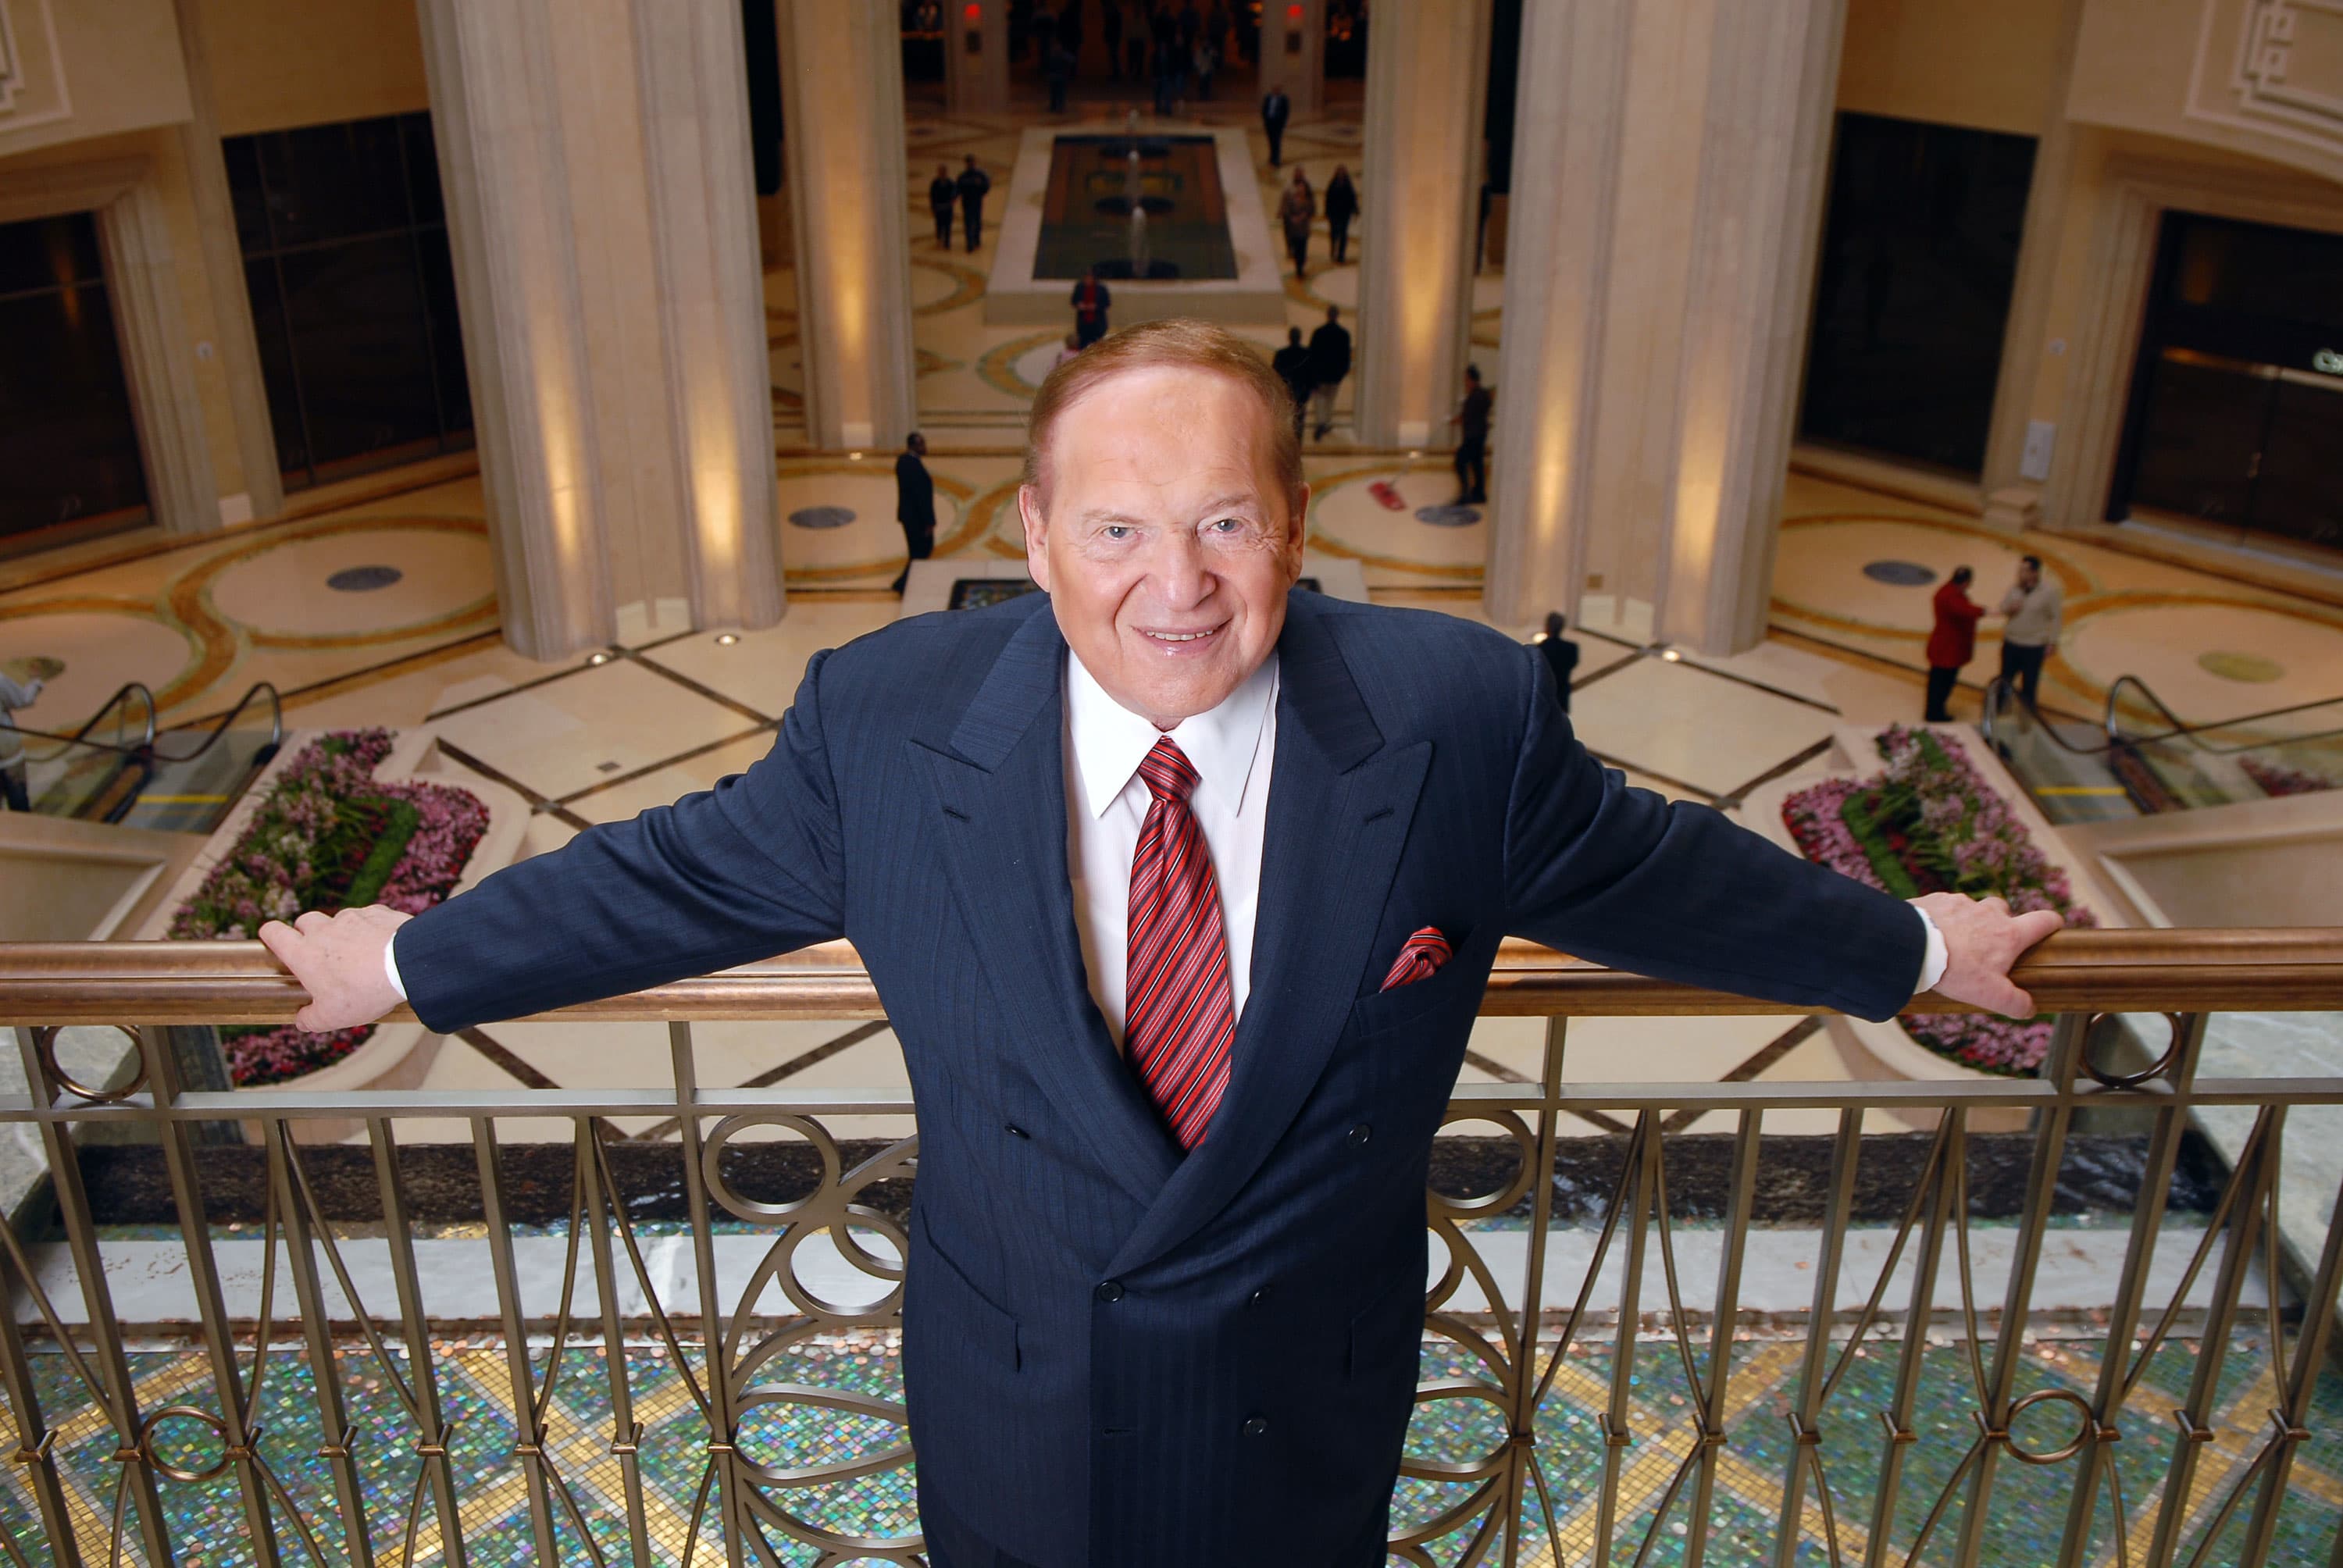 Casino magnate and GOP megadonor Sheldon Adelson has died at the age of 87